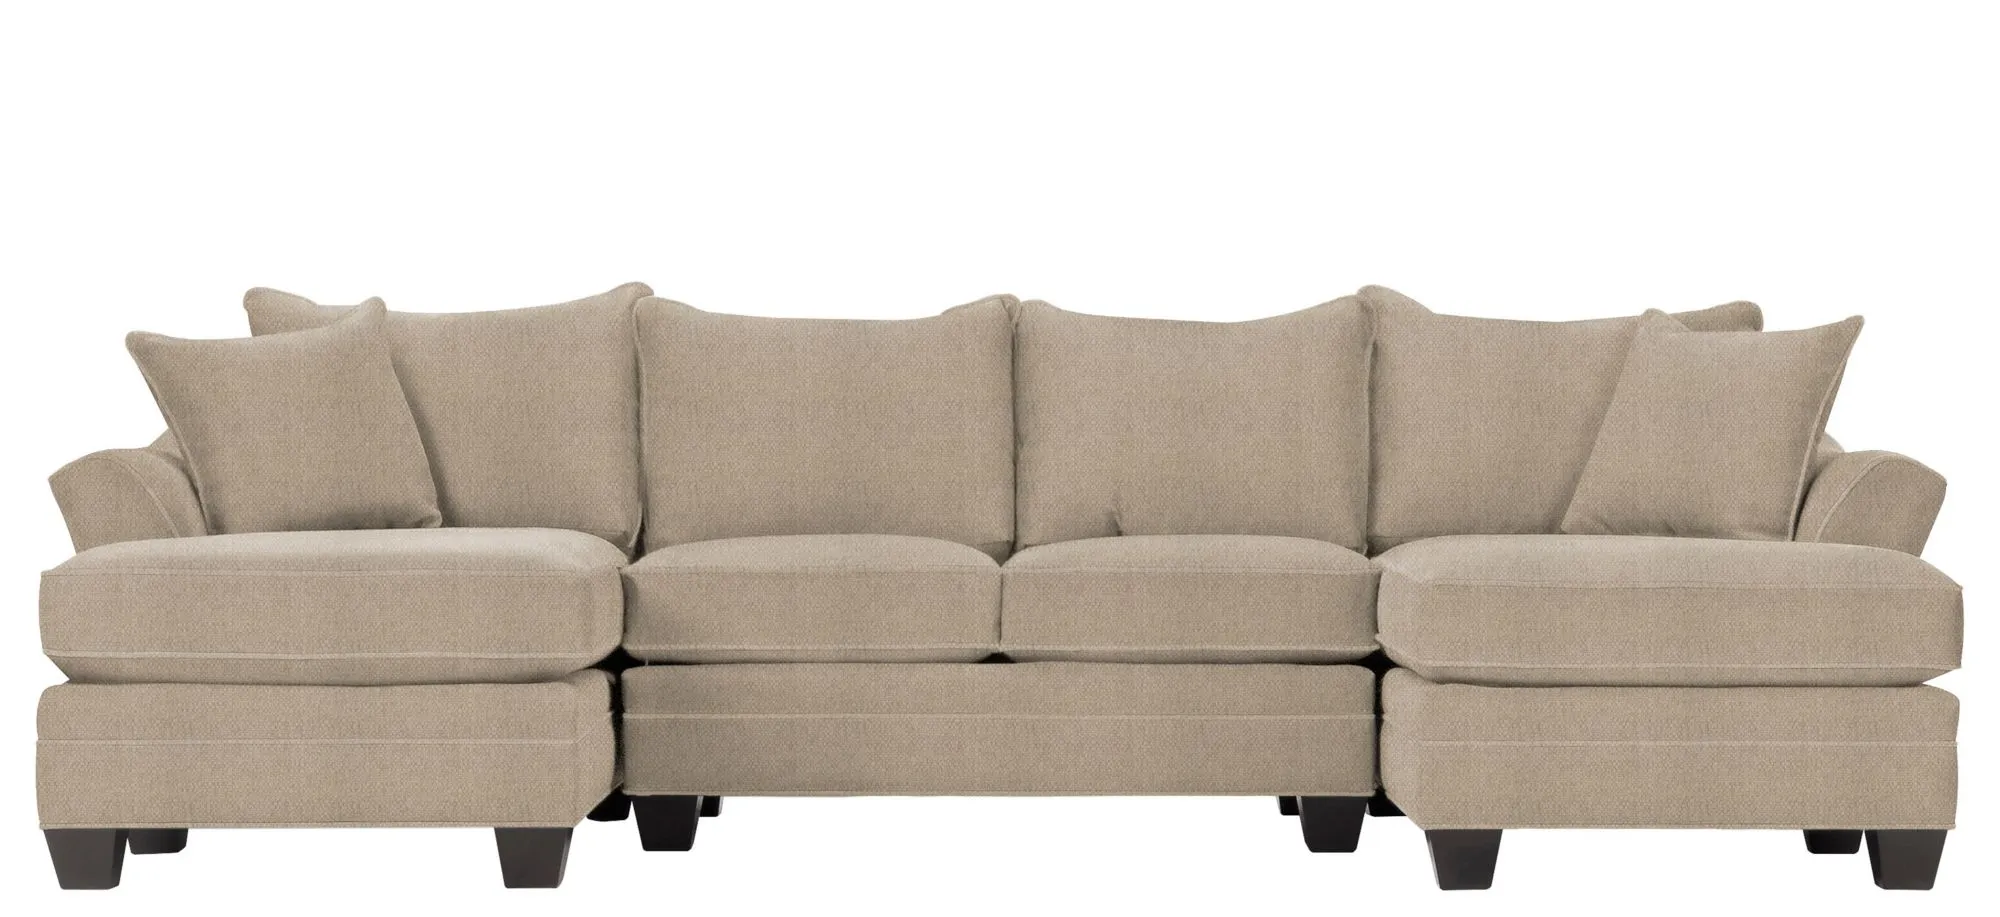 Foresthill 3-pc. Symmetrical Chaise Sectional Sofa in Sugar Shack Putty by H.M. Richards